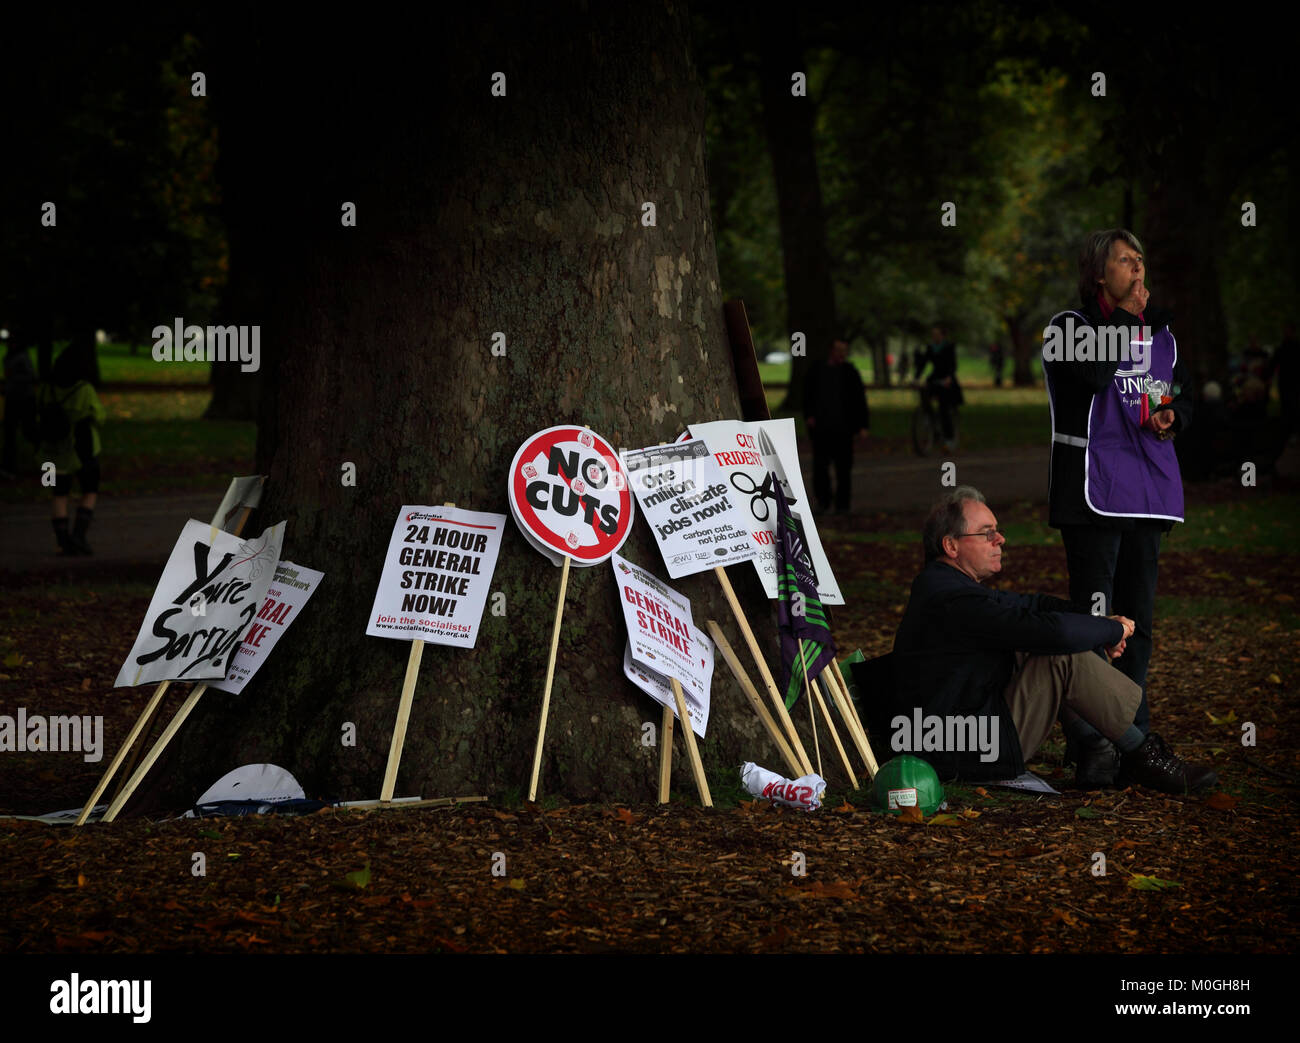 Demonstration against cuts and austerity in London, England, Britain Stock Photo